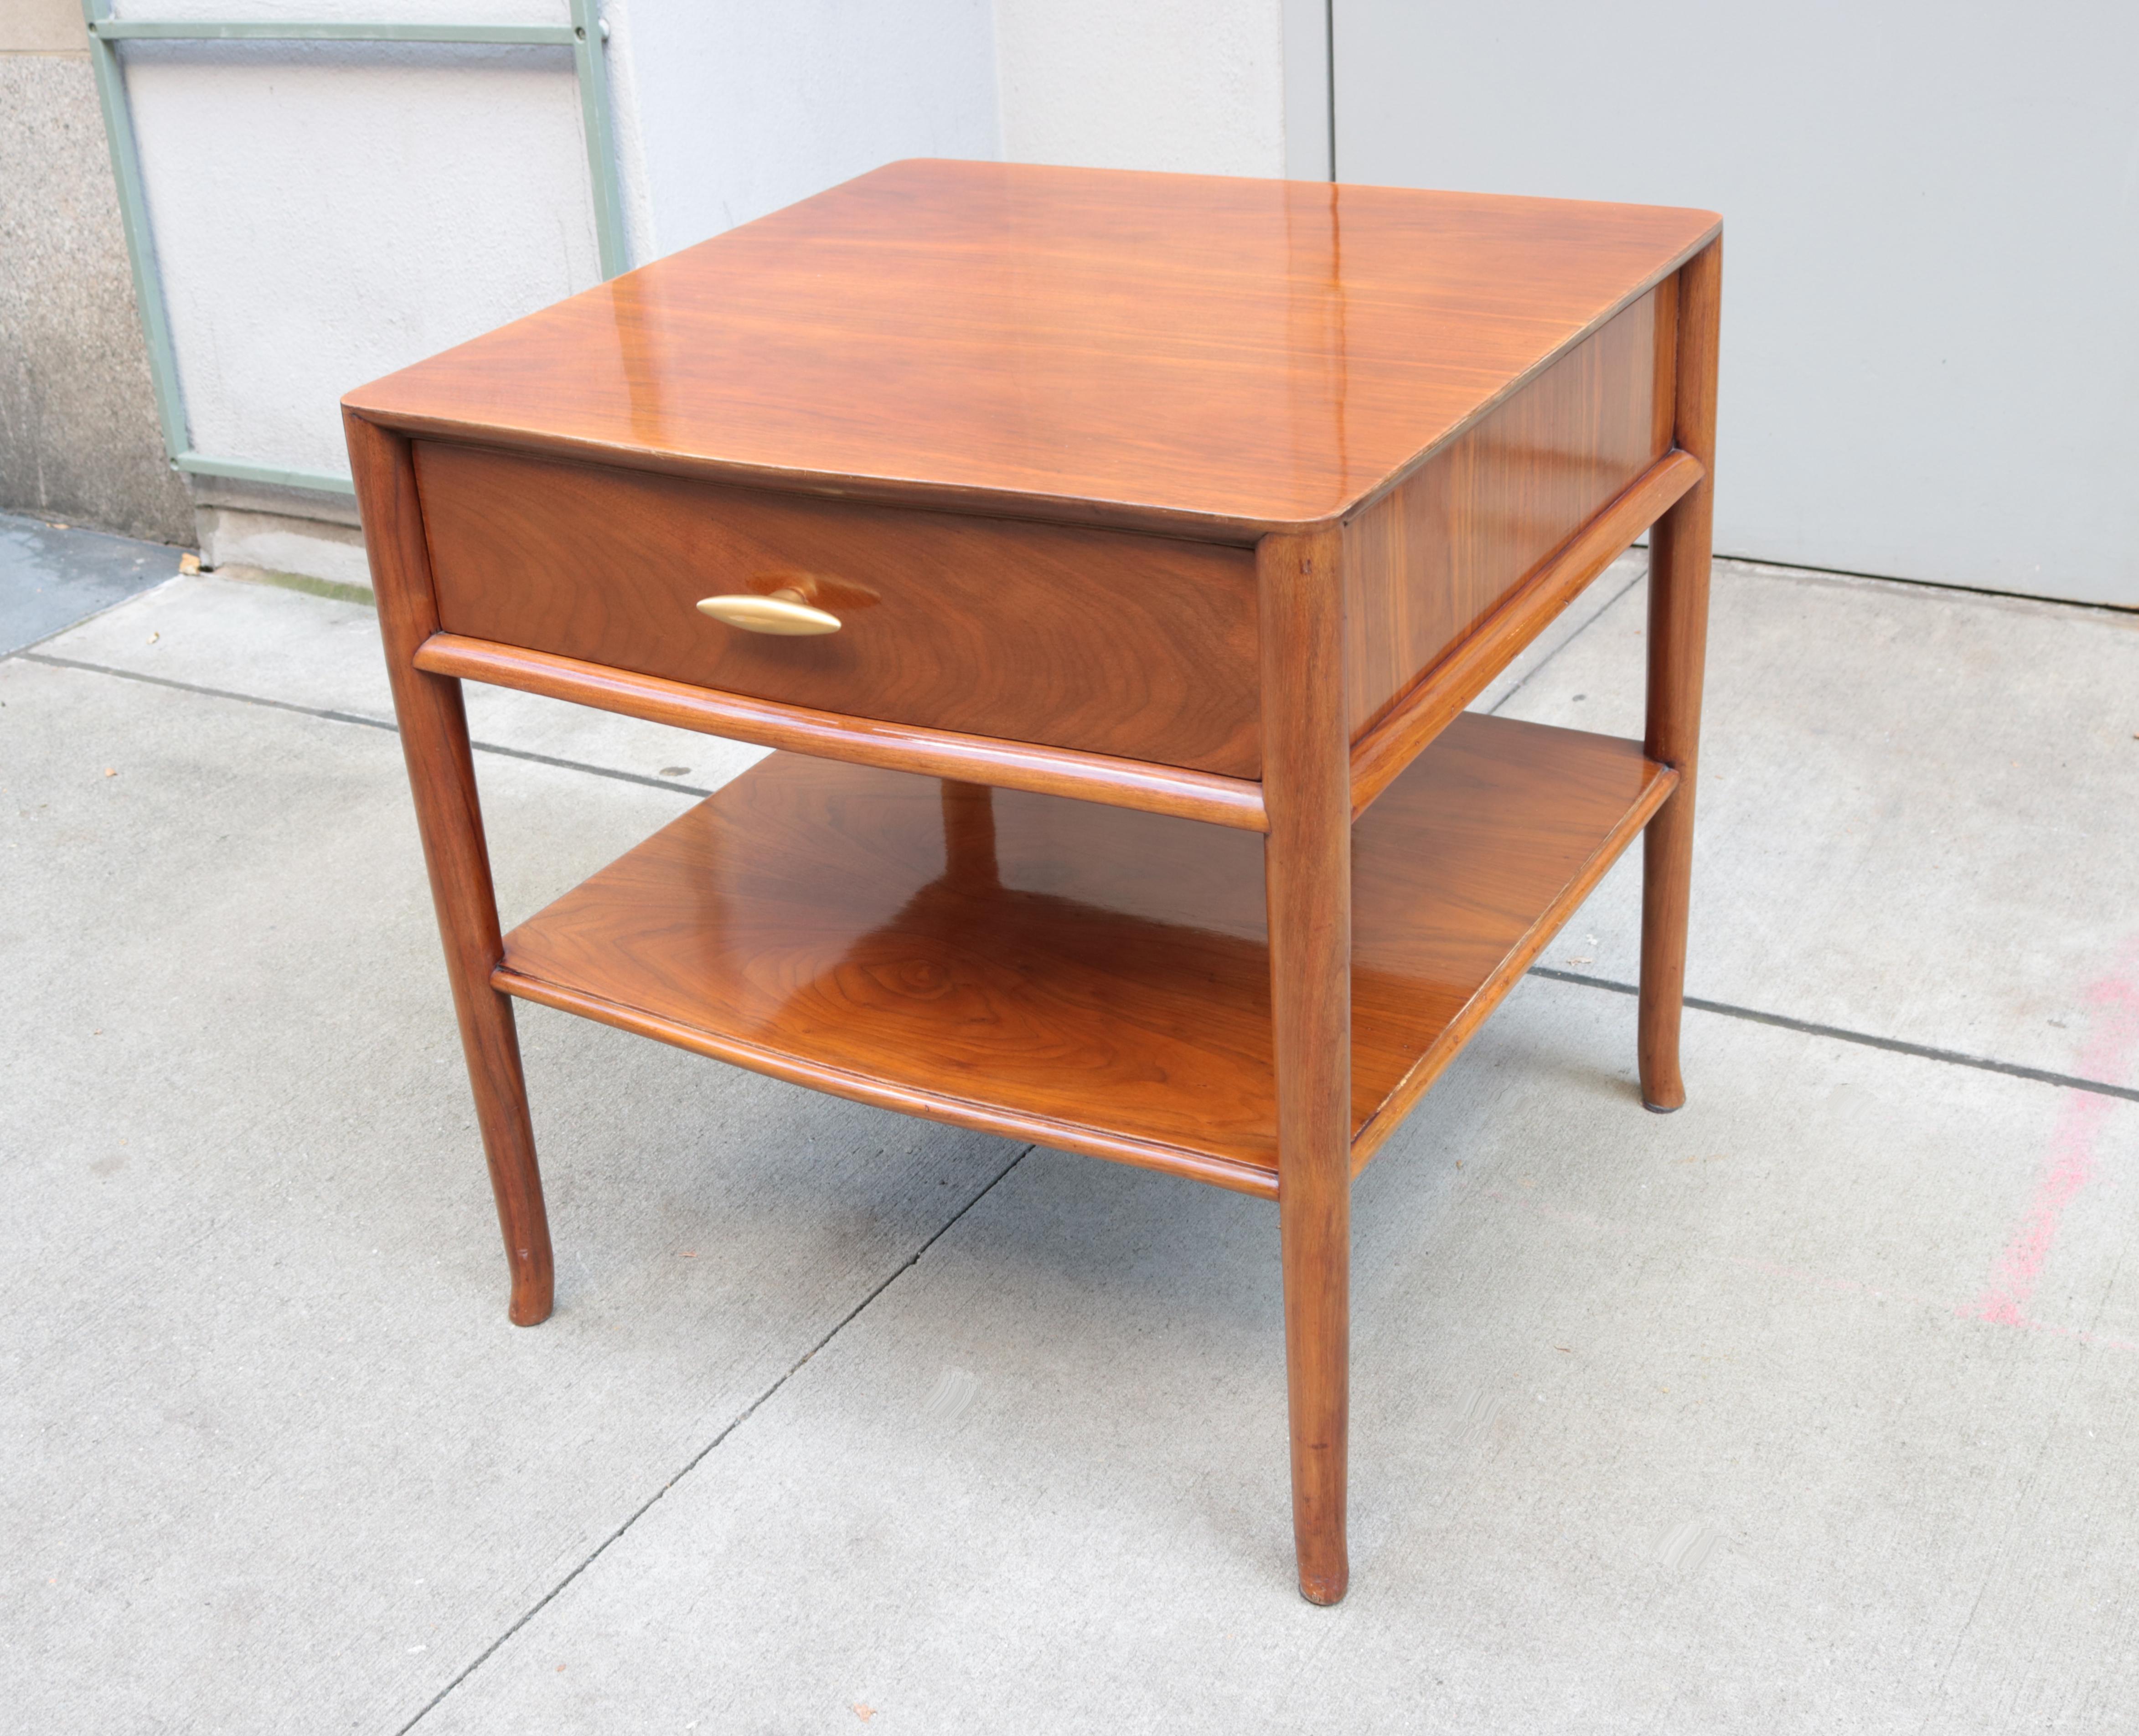 A modernist two tier side table with single drawer.
Designed by T.H.Robsjohn-Gibbings for Widdicomb.
Walnut with original glazed gold porcelain pulls.
Featuring the original Widdicomb labels.